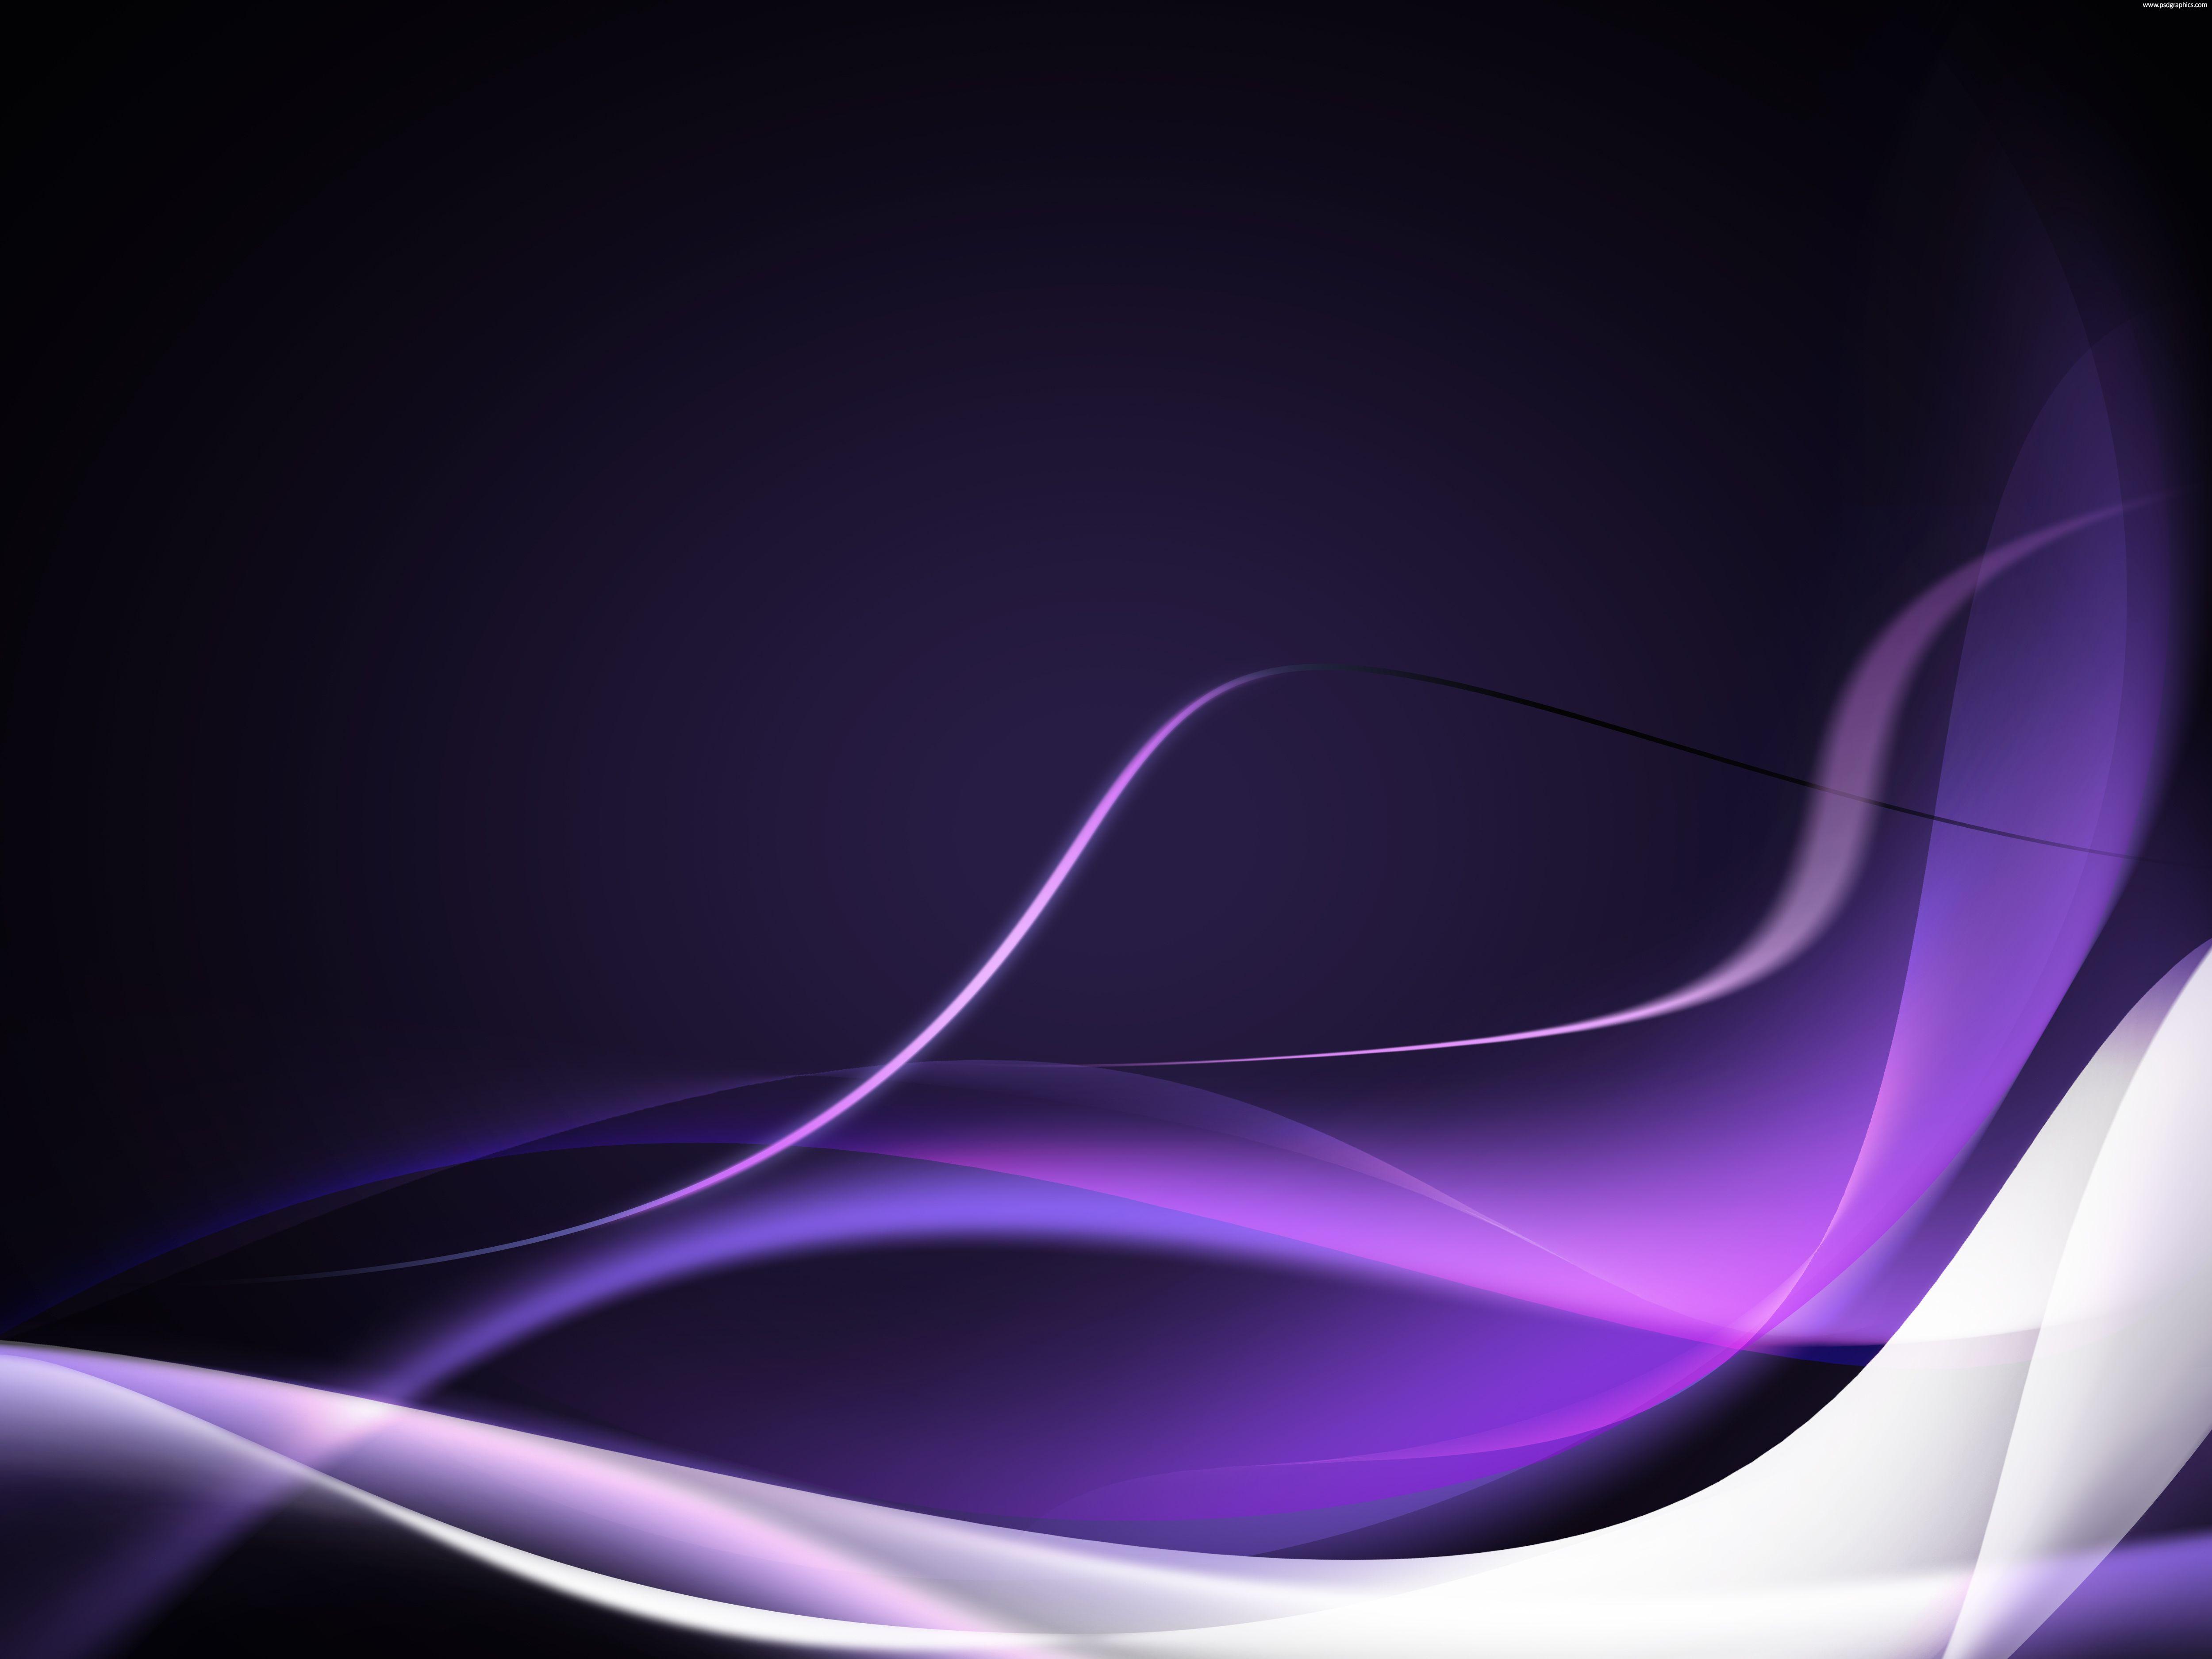 Purple with White Waves Logo - Purple waves background